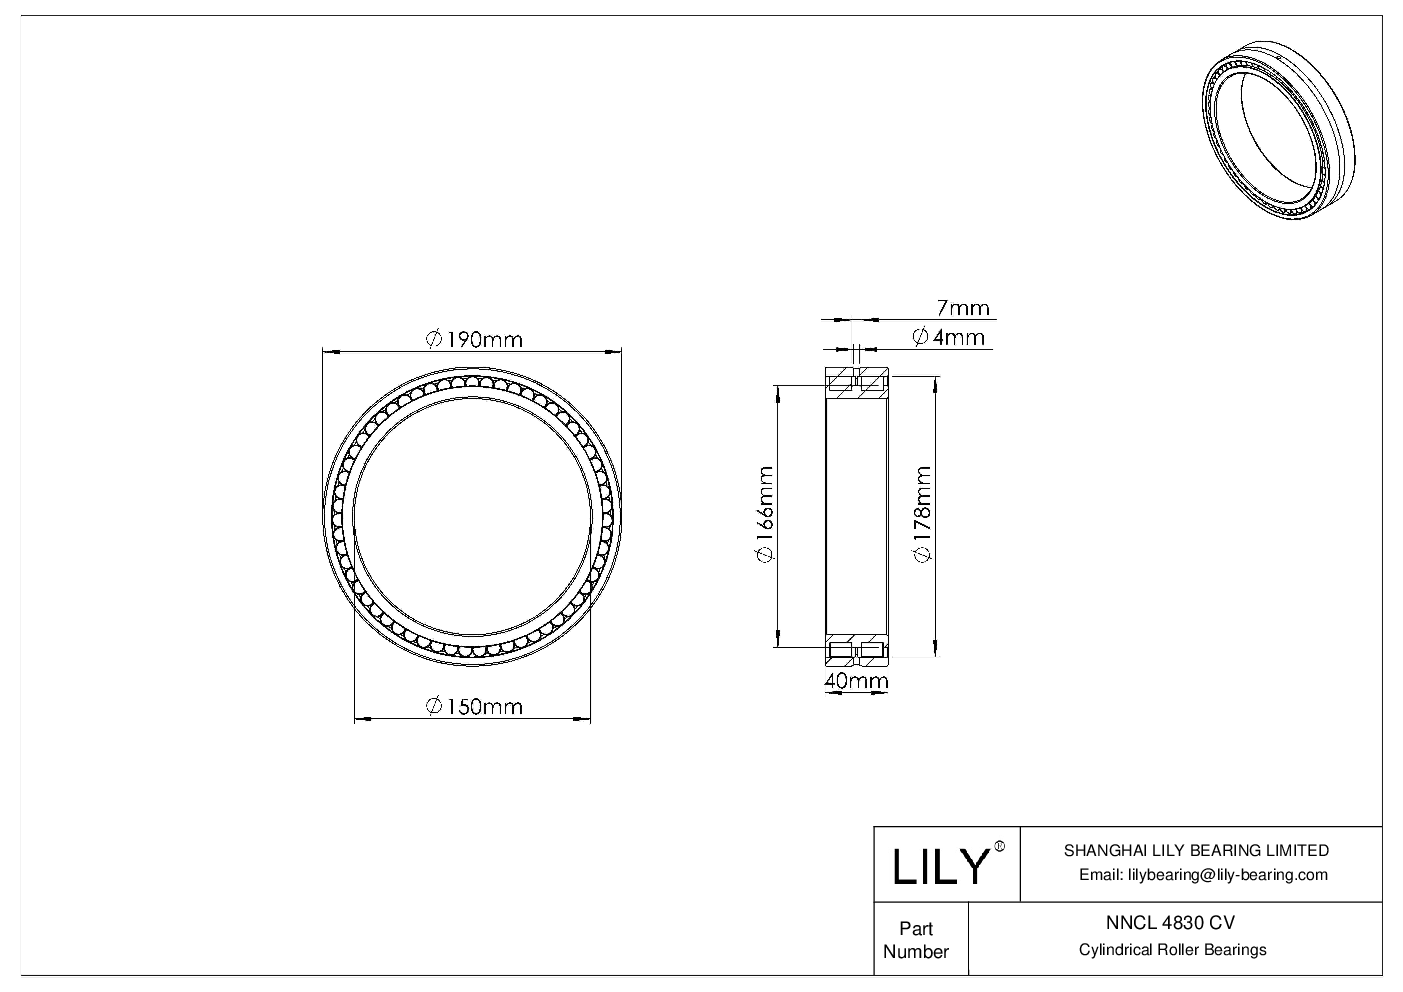 NNCL 4830 CV Double Row Full Complement Cylindrical Roller Bearings cad drawing